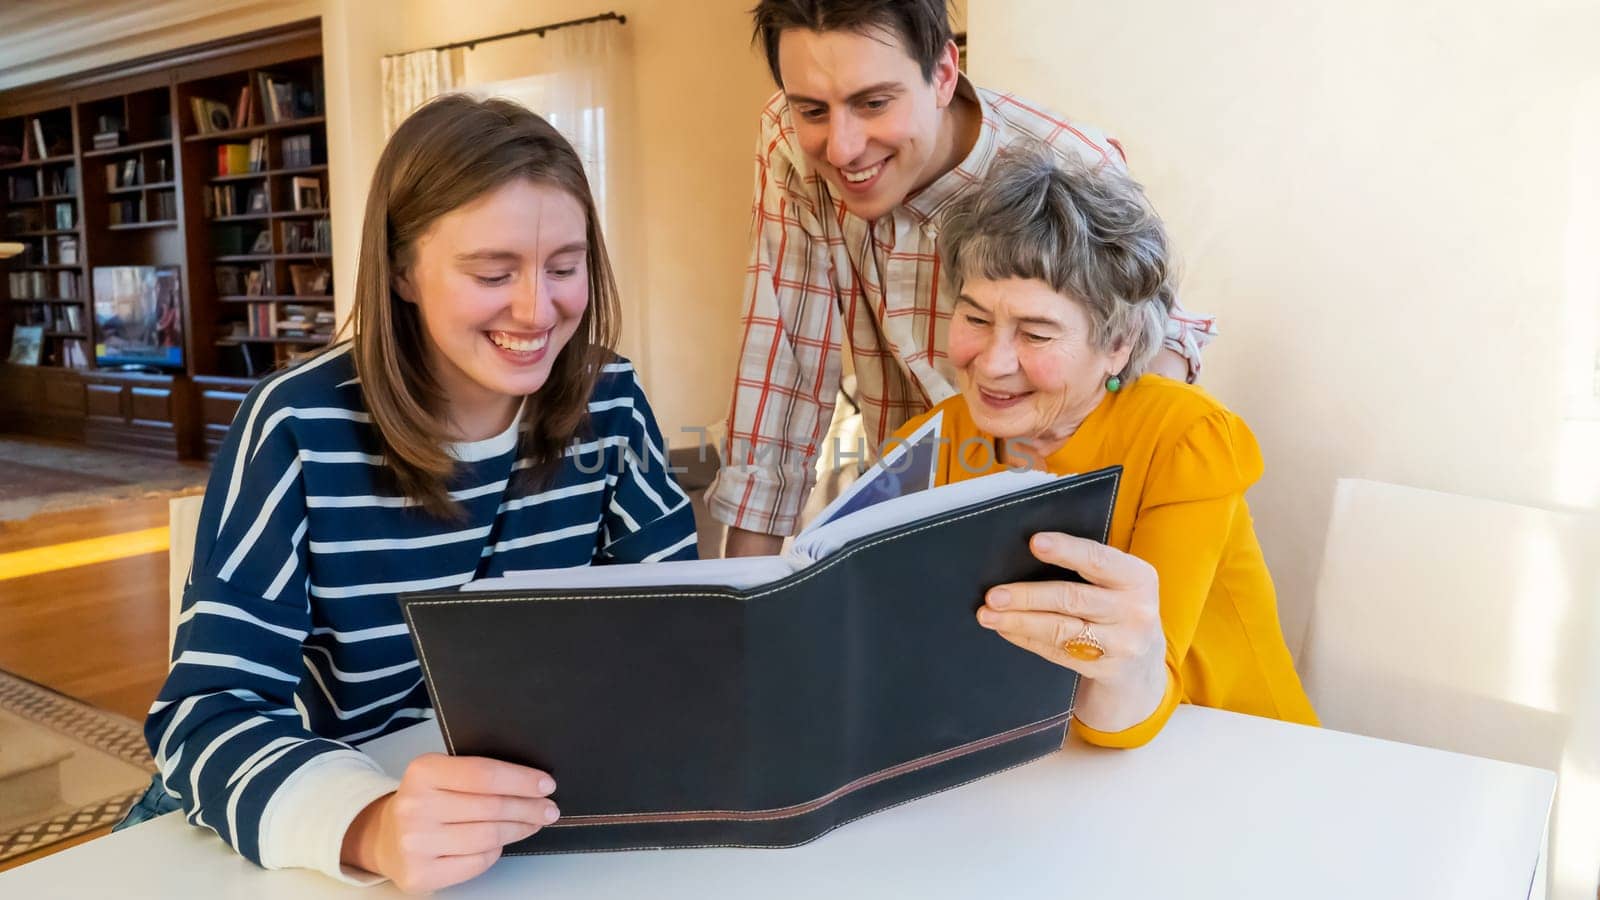 Family smiles happily and spends time together at home, young girl and a man look at photo album with their grandmother, help an elderly woman remember her youth, visit and take care of grandparents.